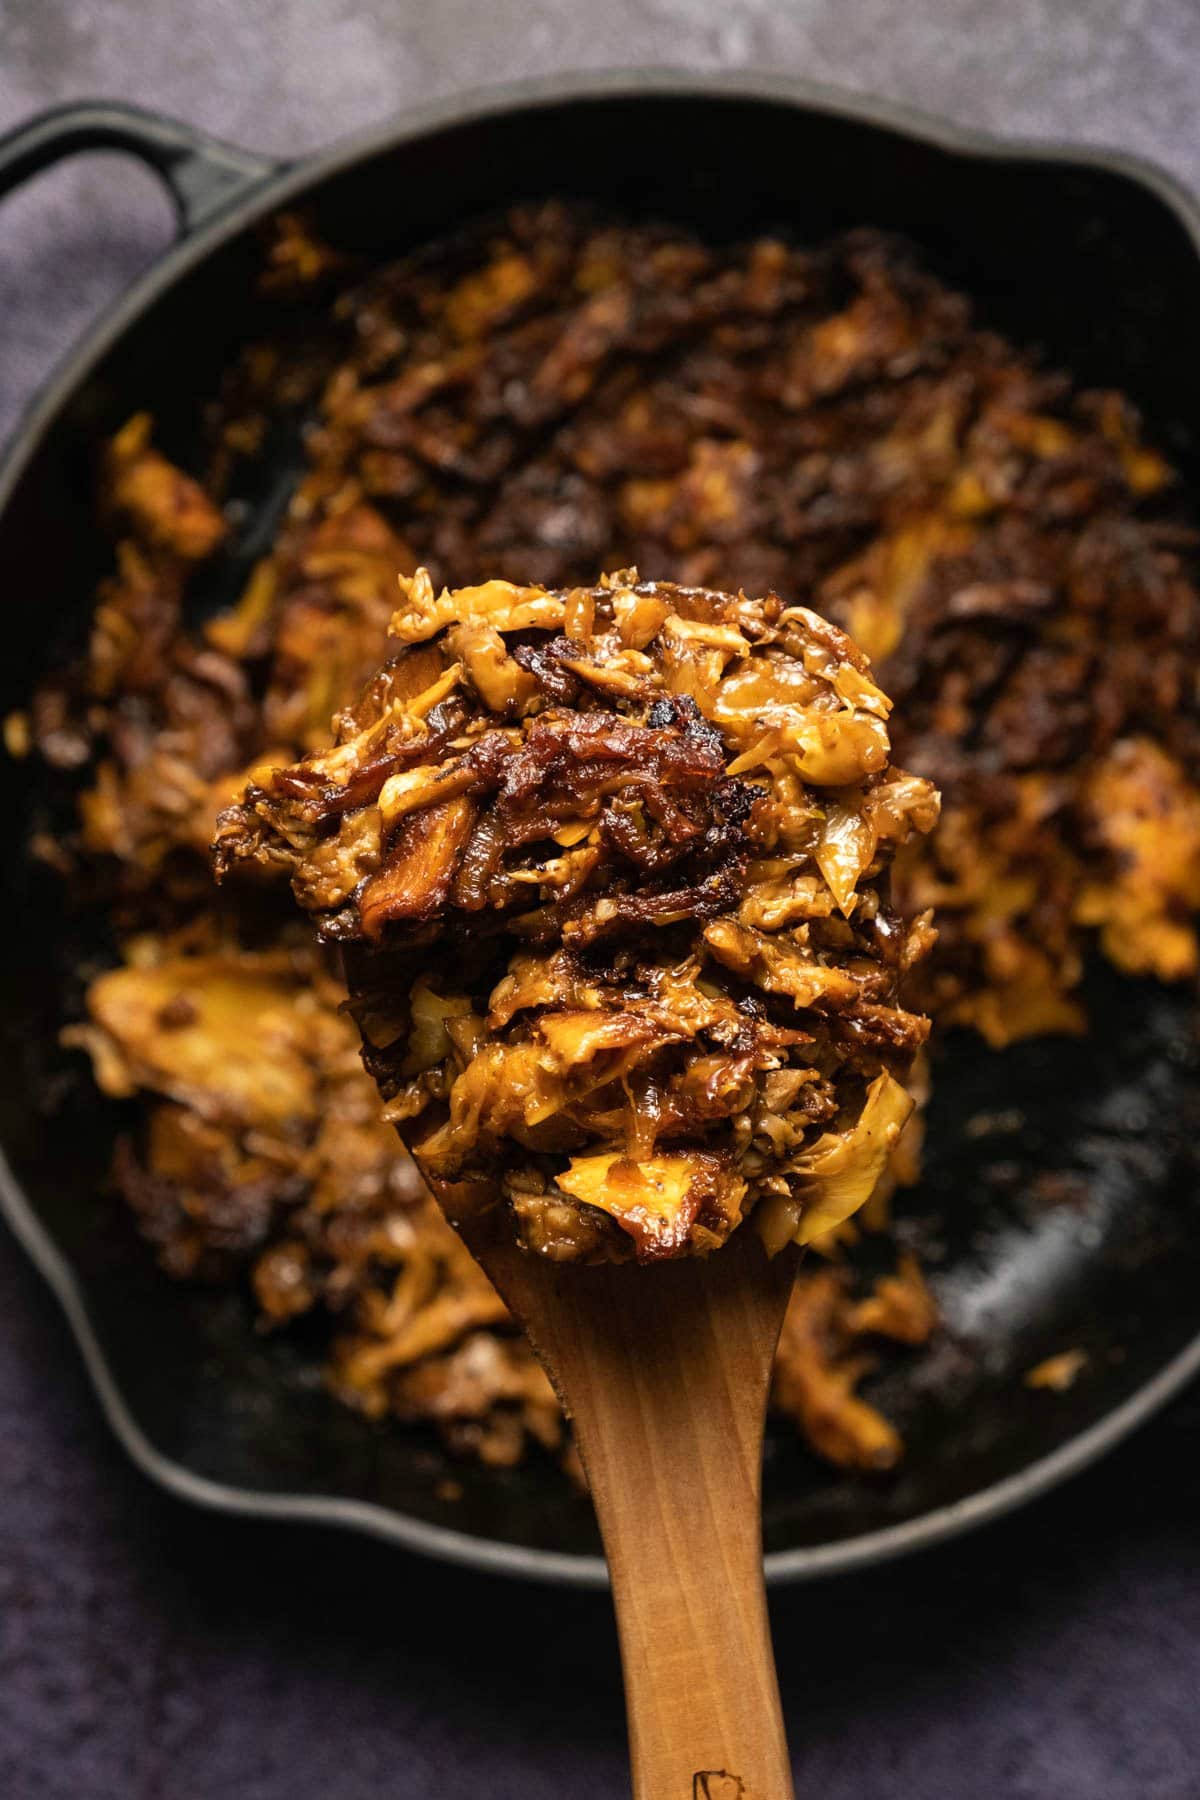 Baked mushroom and artichoke in a skillet.